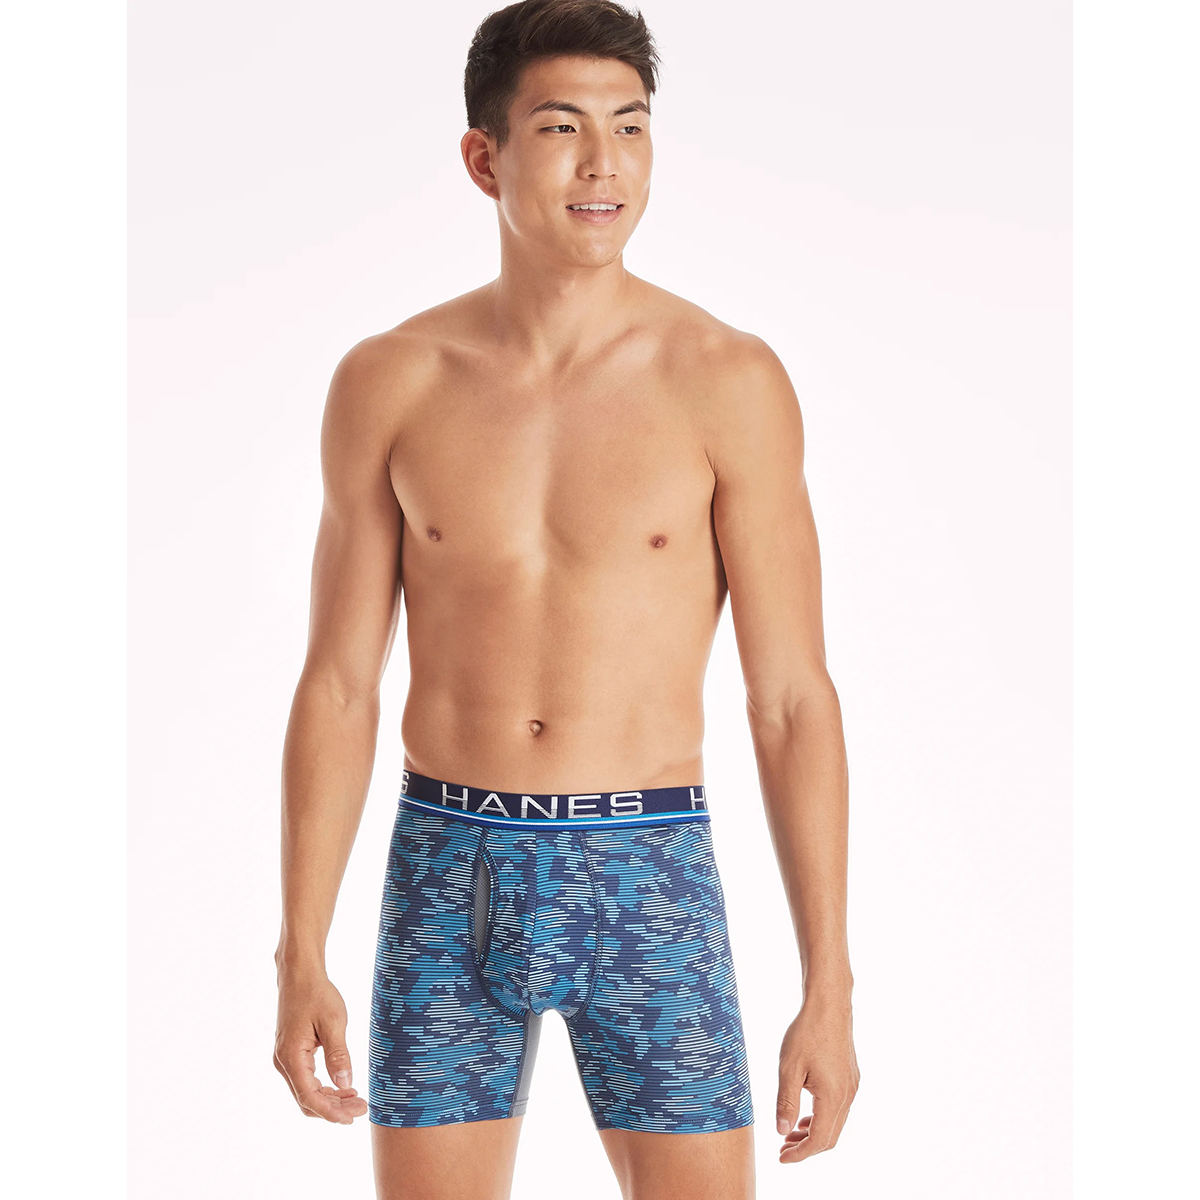 Hanes Mens X-Temp Total Support Pouch Boxer Briefs India